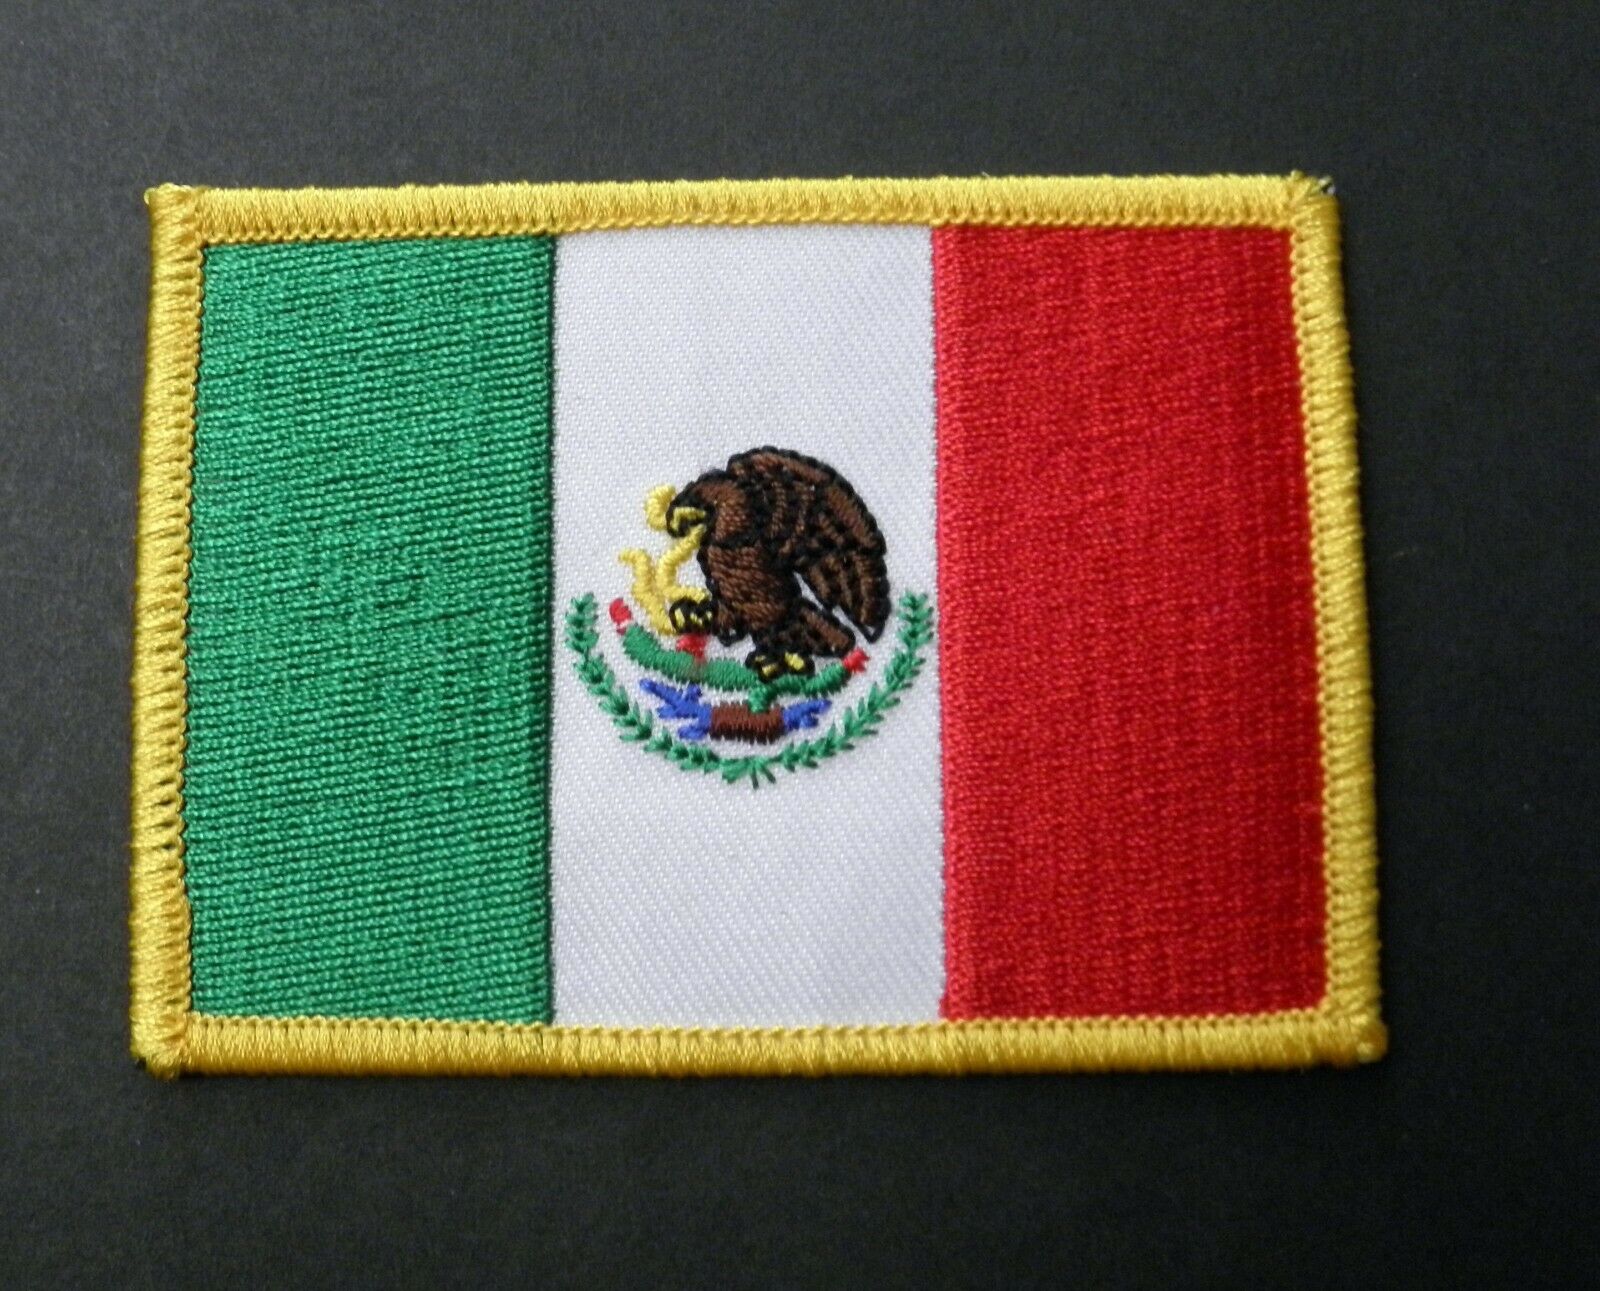 MEXICO MEXICAN FLAG EMBROIDERED SHOULDER PATCH 3.5 X 2.5 INCHES